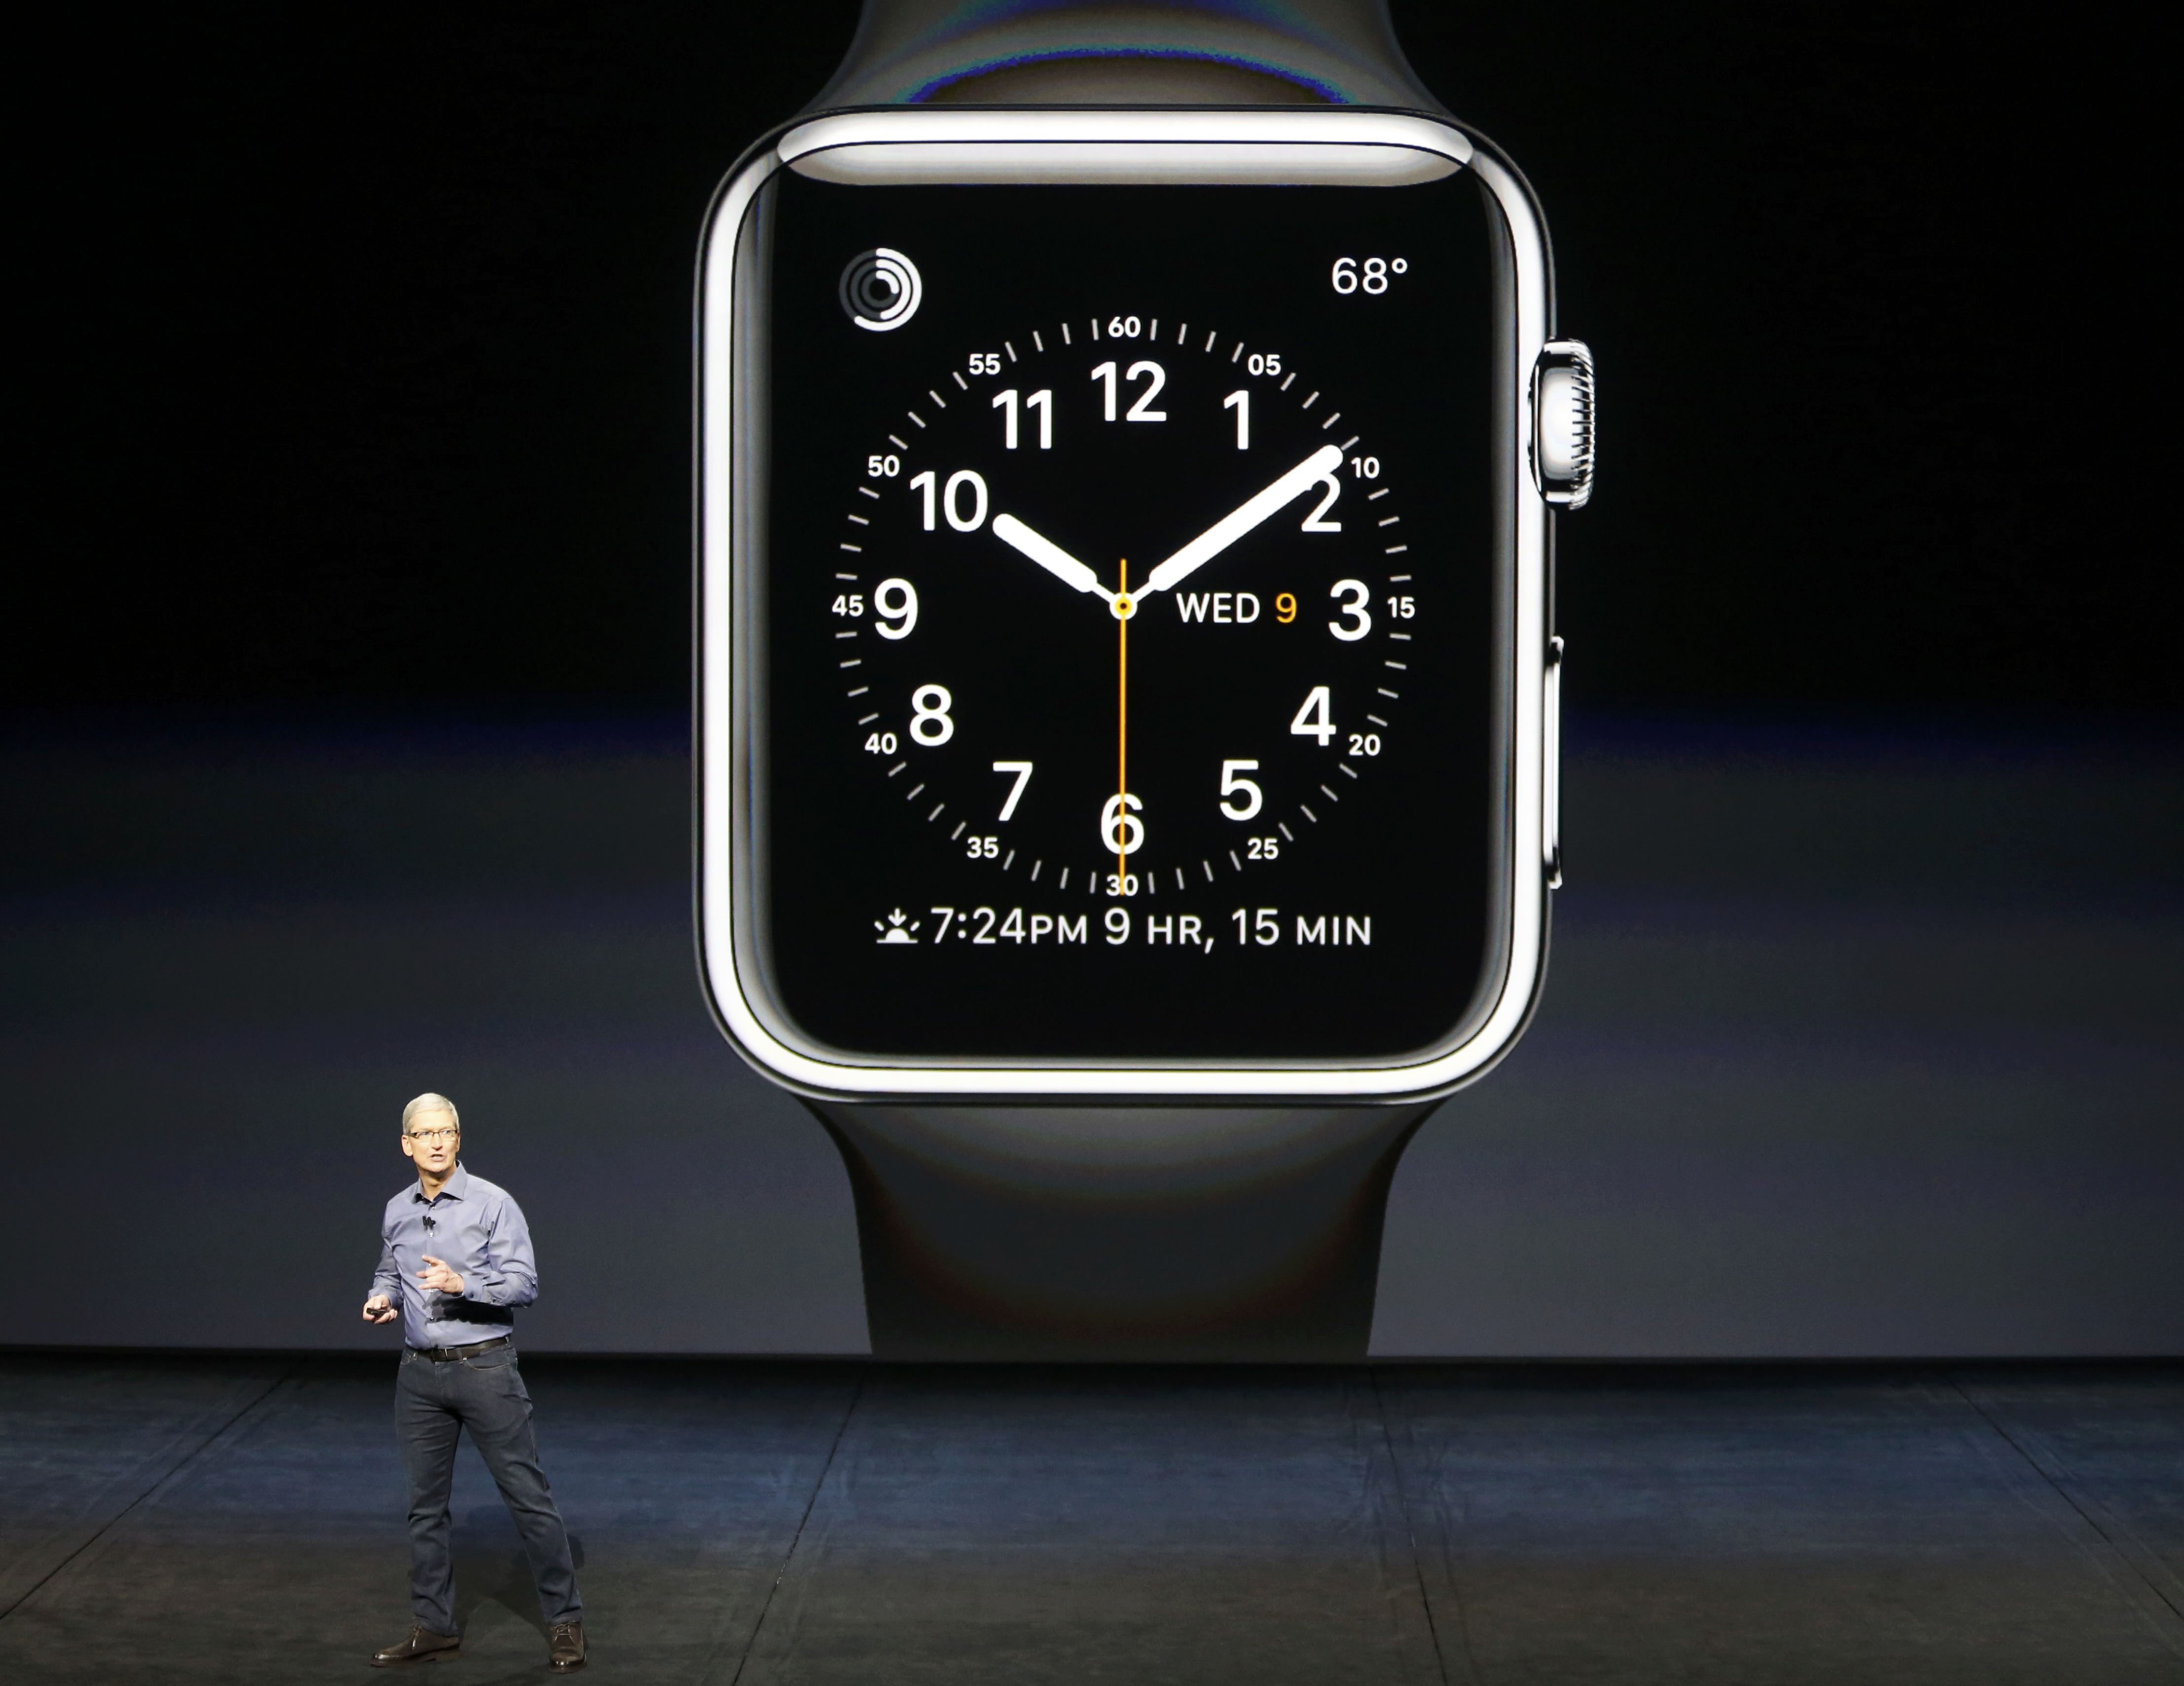 Cilia gebruiker Kind Apple Watch 2 coming this year, report says - CBS News